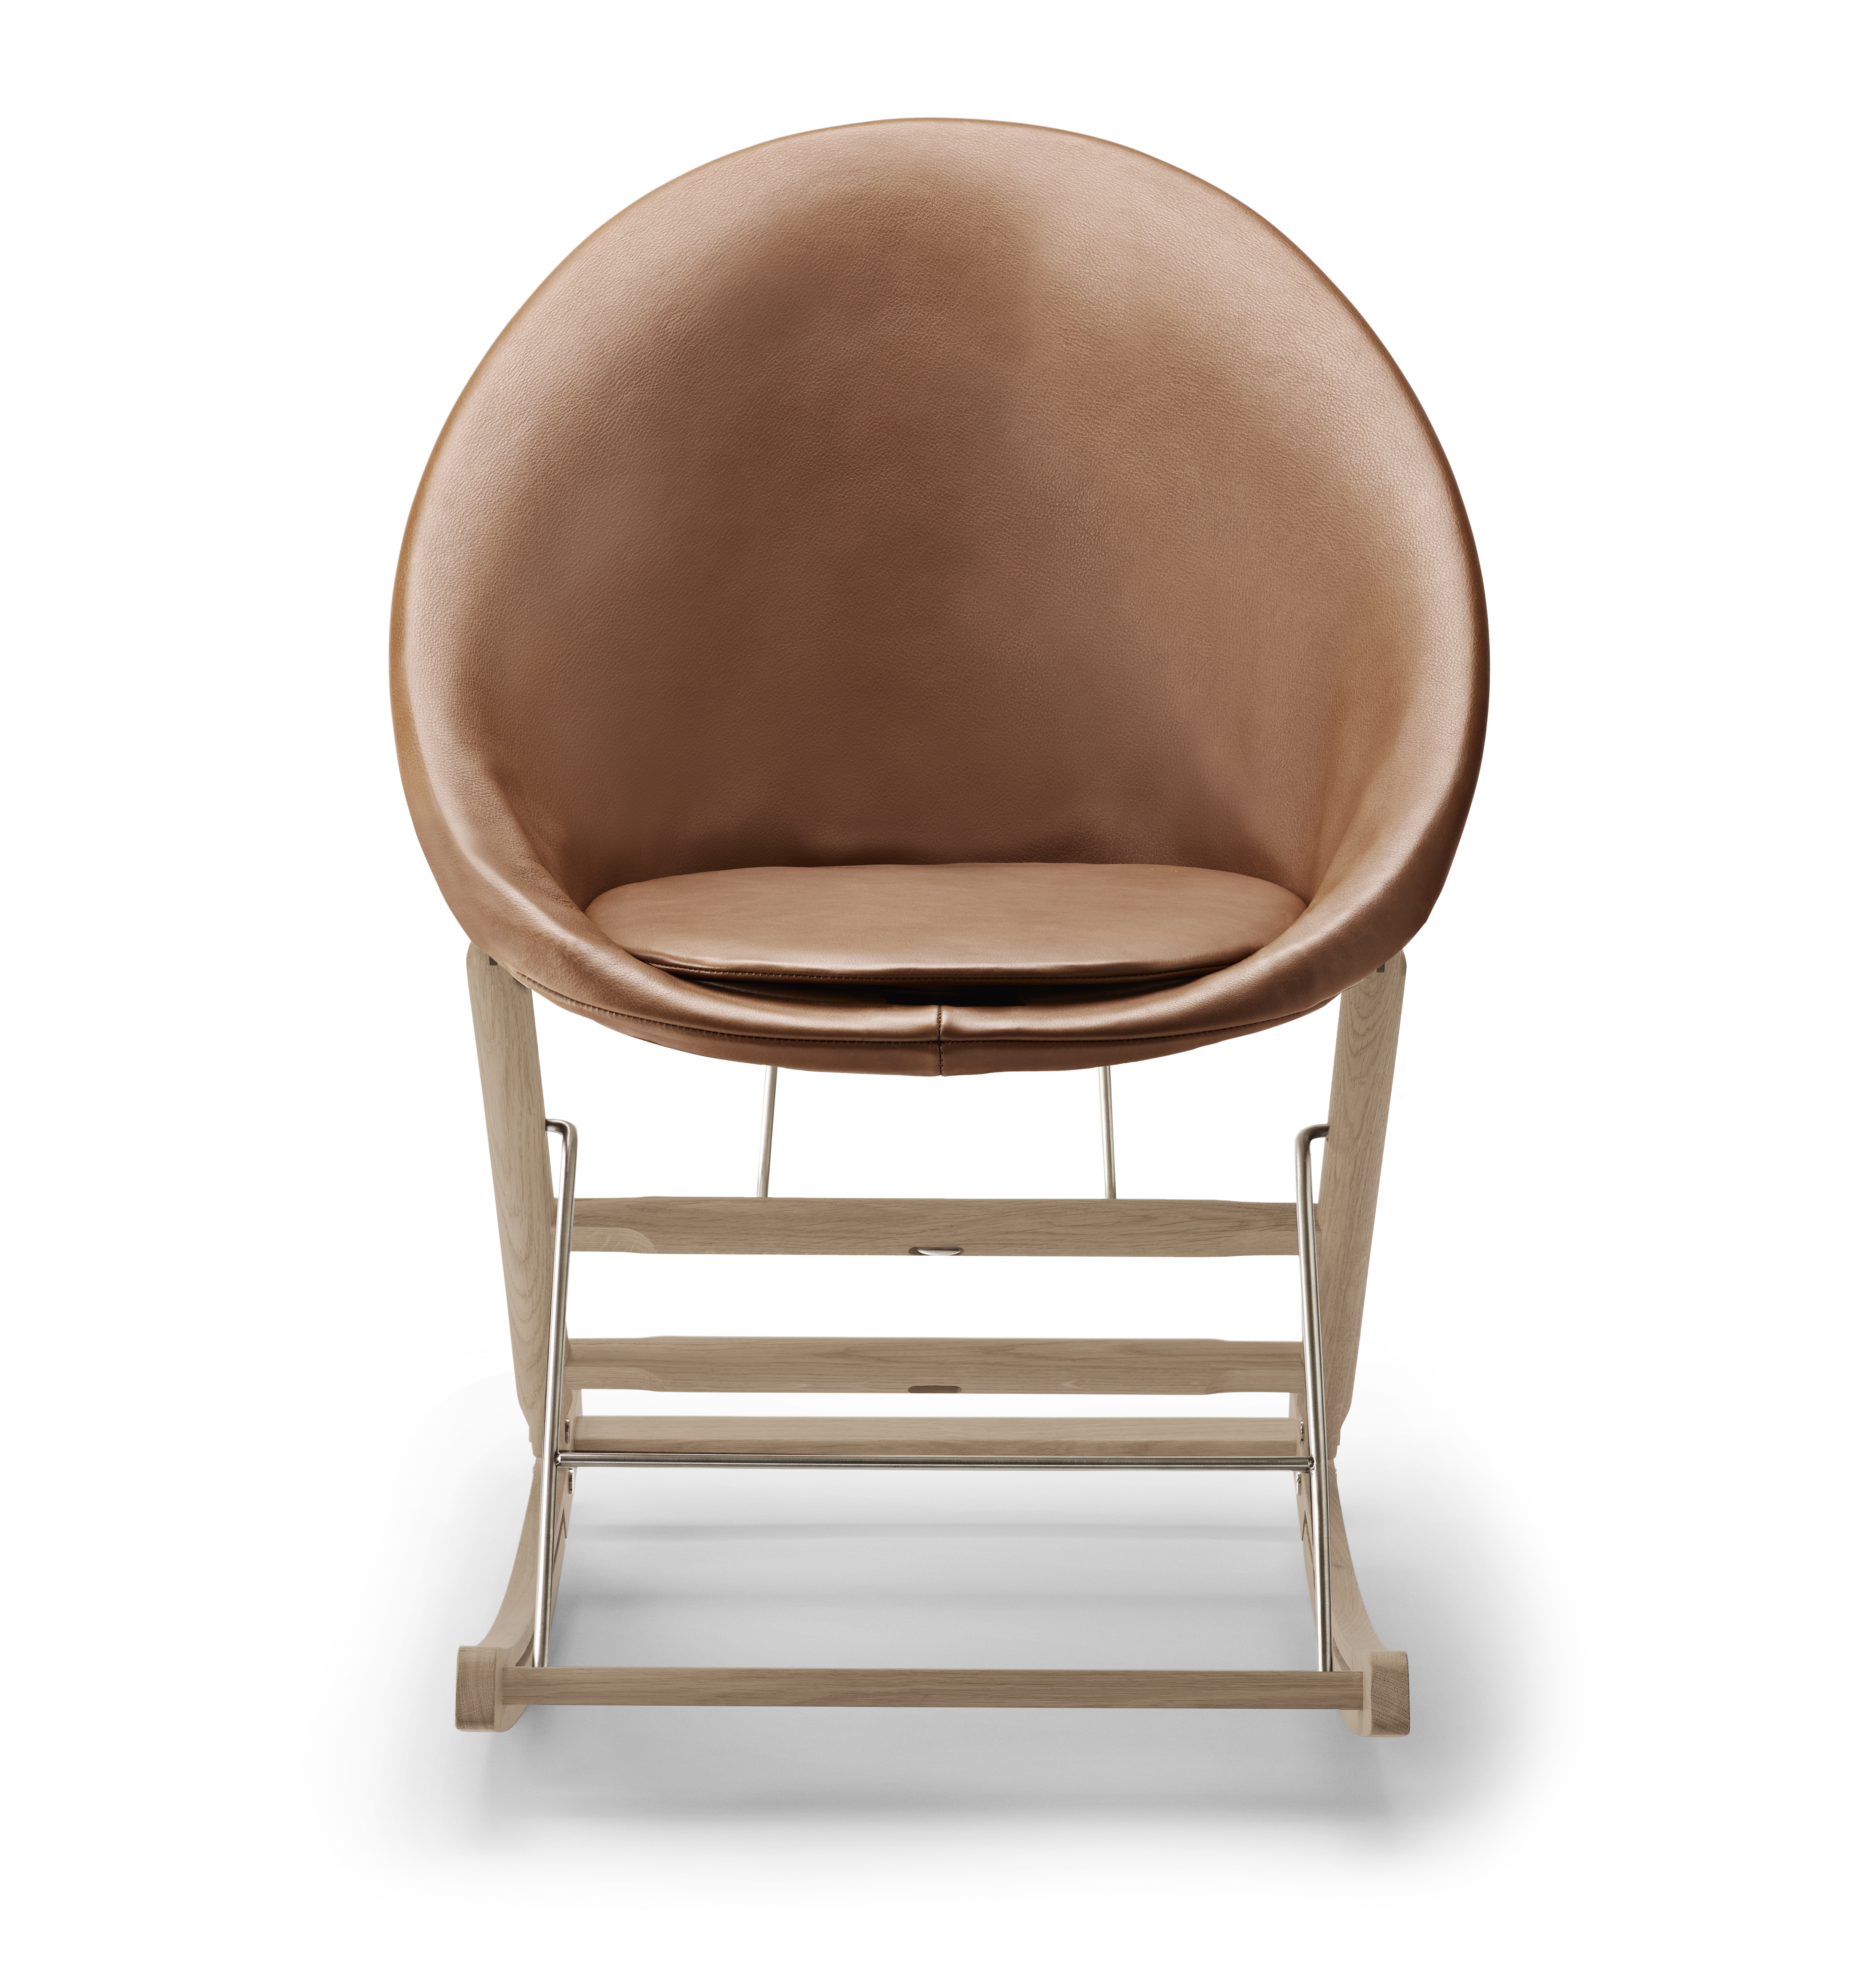 AB001 Rocking Nest Chair eiken zeep Roestvrij staal Sif 95-Sif